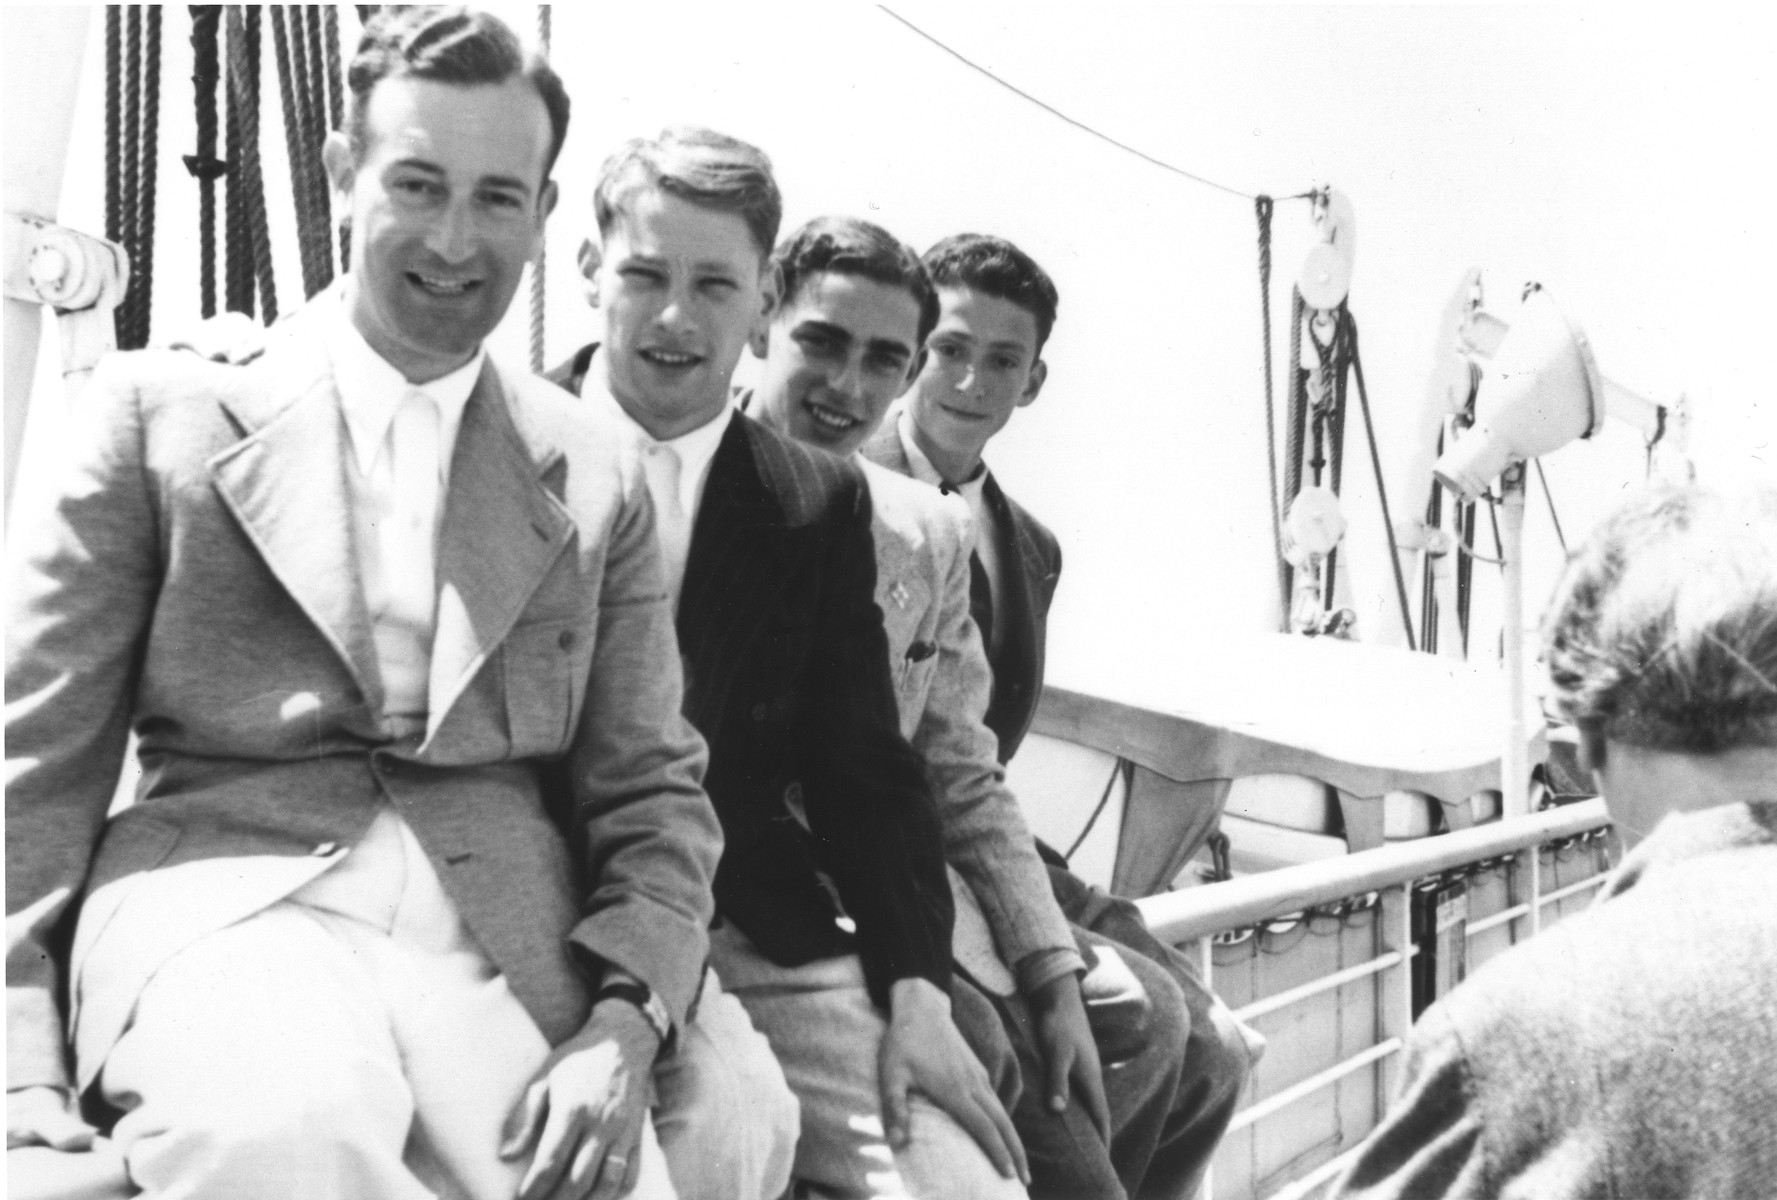 Four young Jewish refugees sit on the railing along the deck of the MS St. Louis.

Pictured from left to right are Werner Lenneberg, Fritz Hilb, Fritz Buff and unknown.